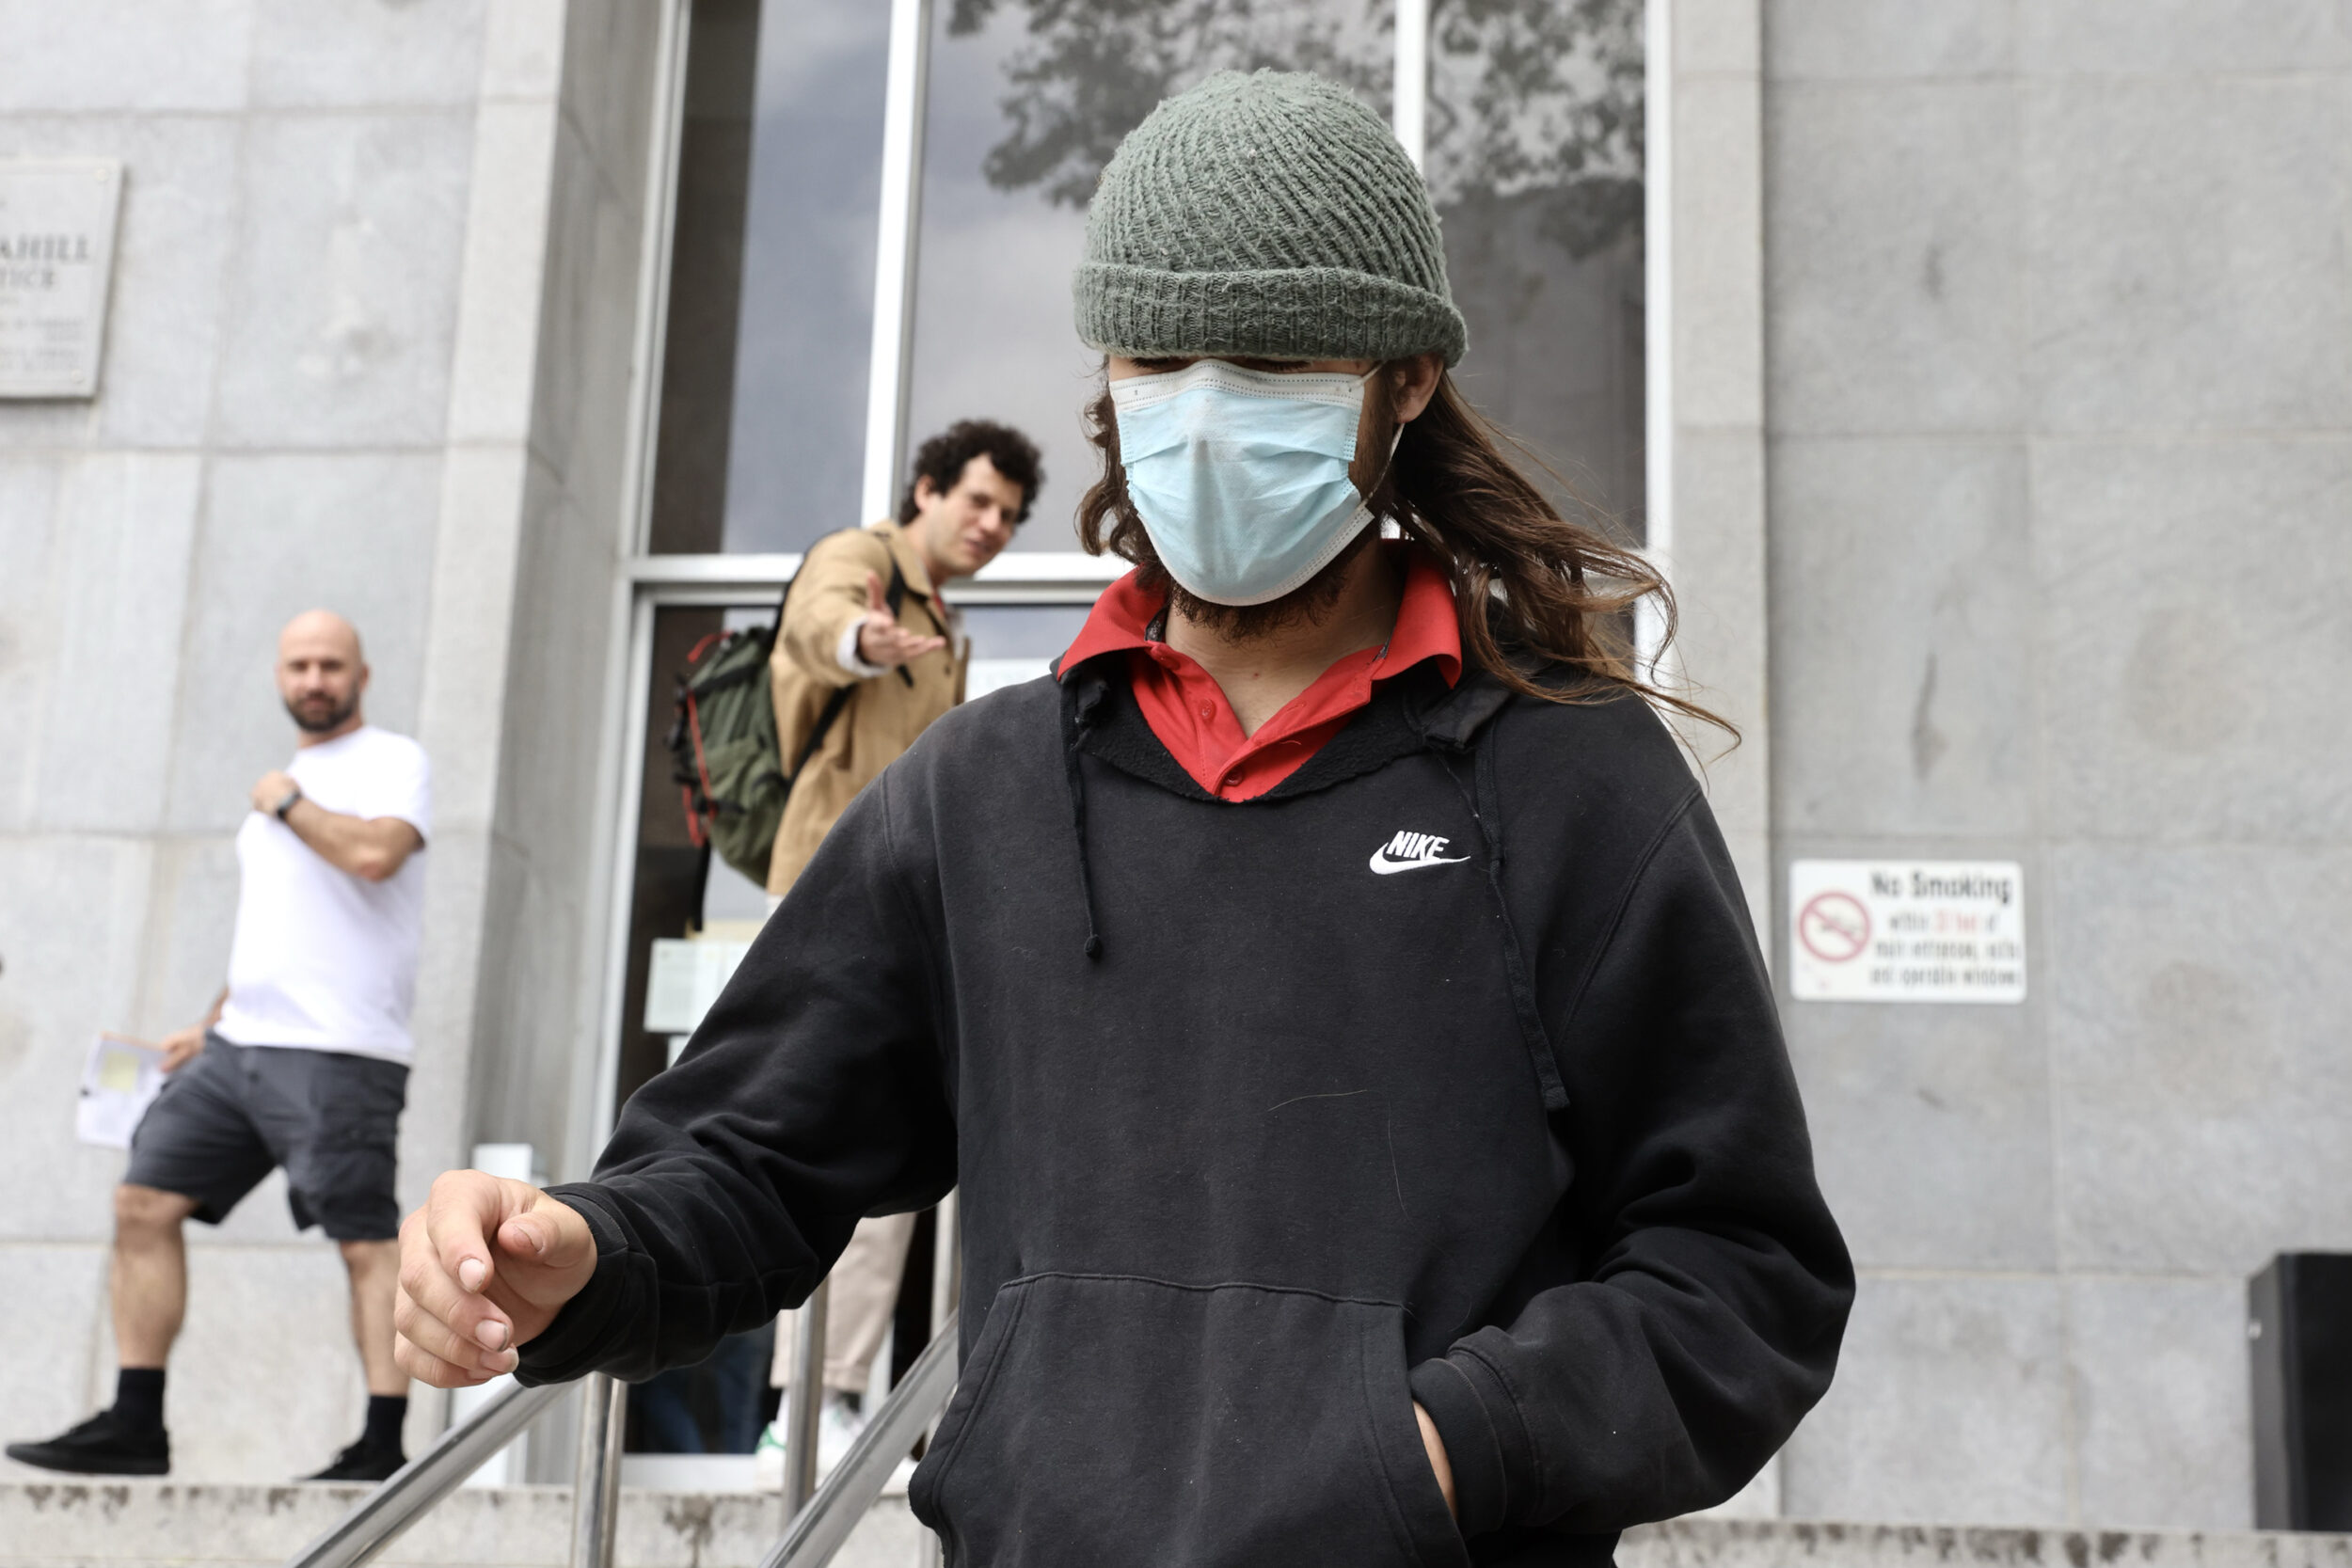 A person in a beanie and face mask descends steps, with onlookers in the background.